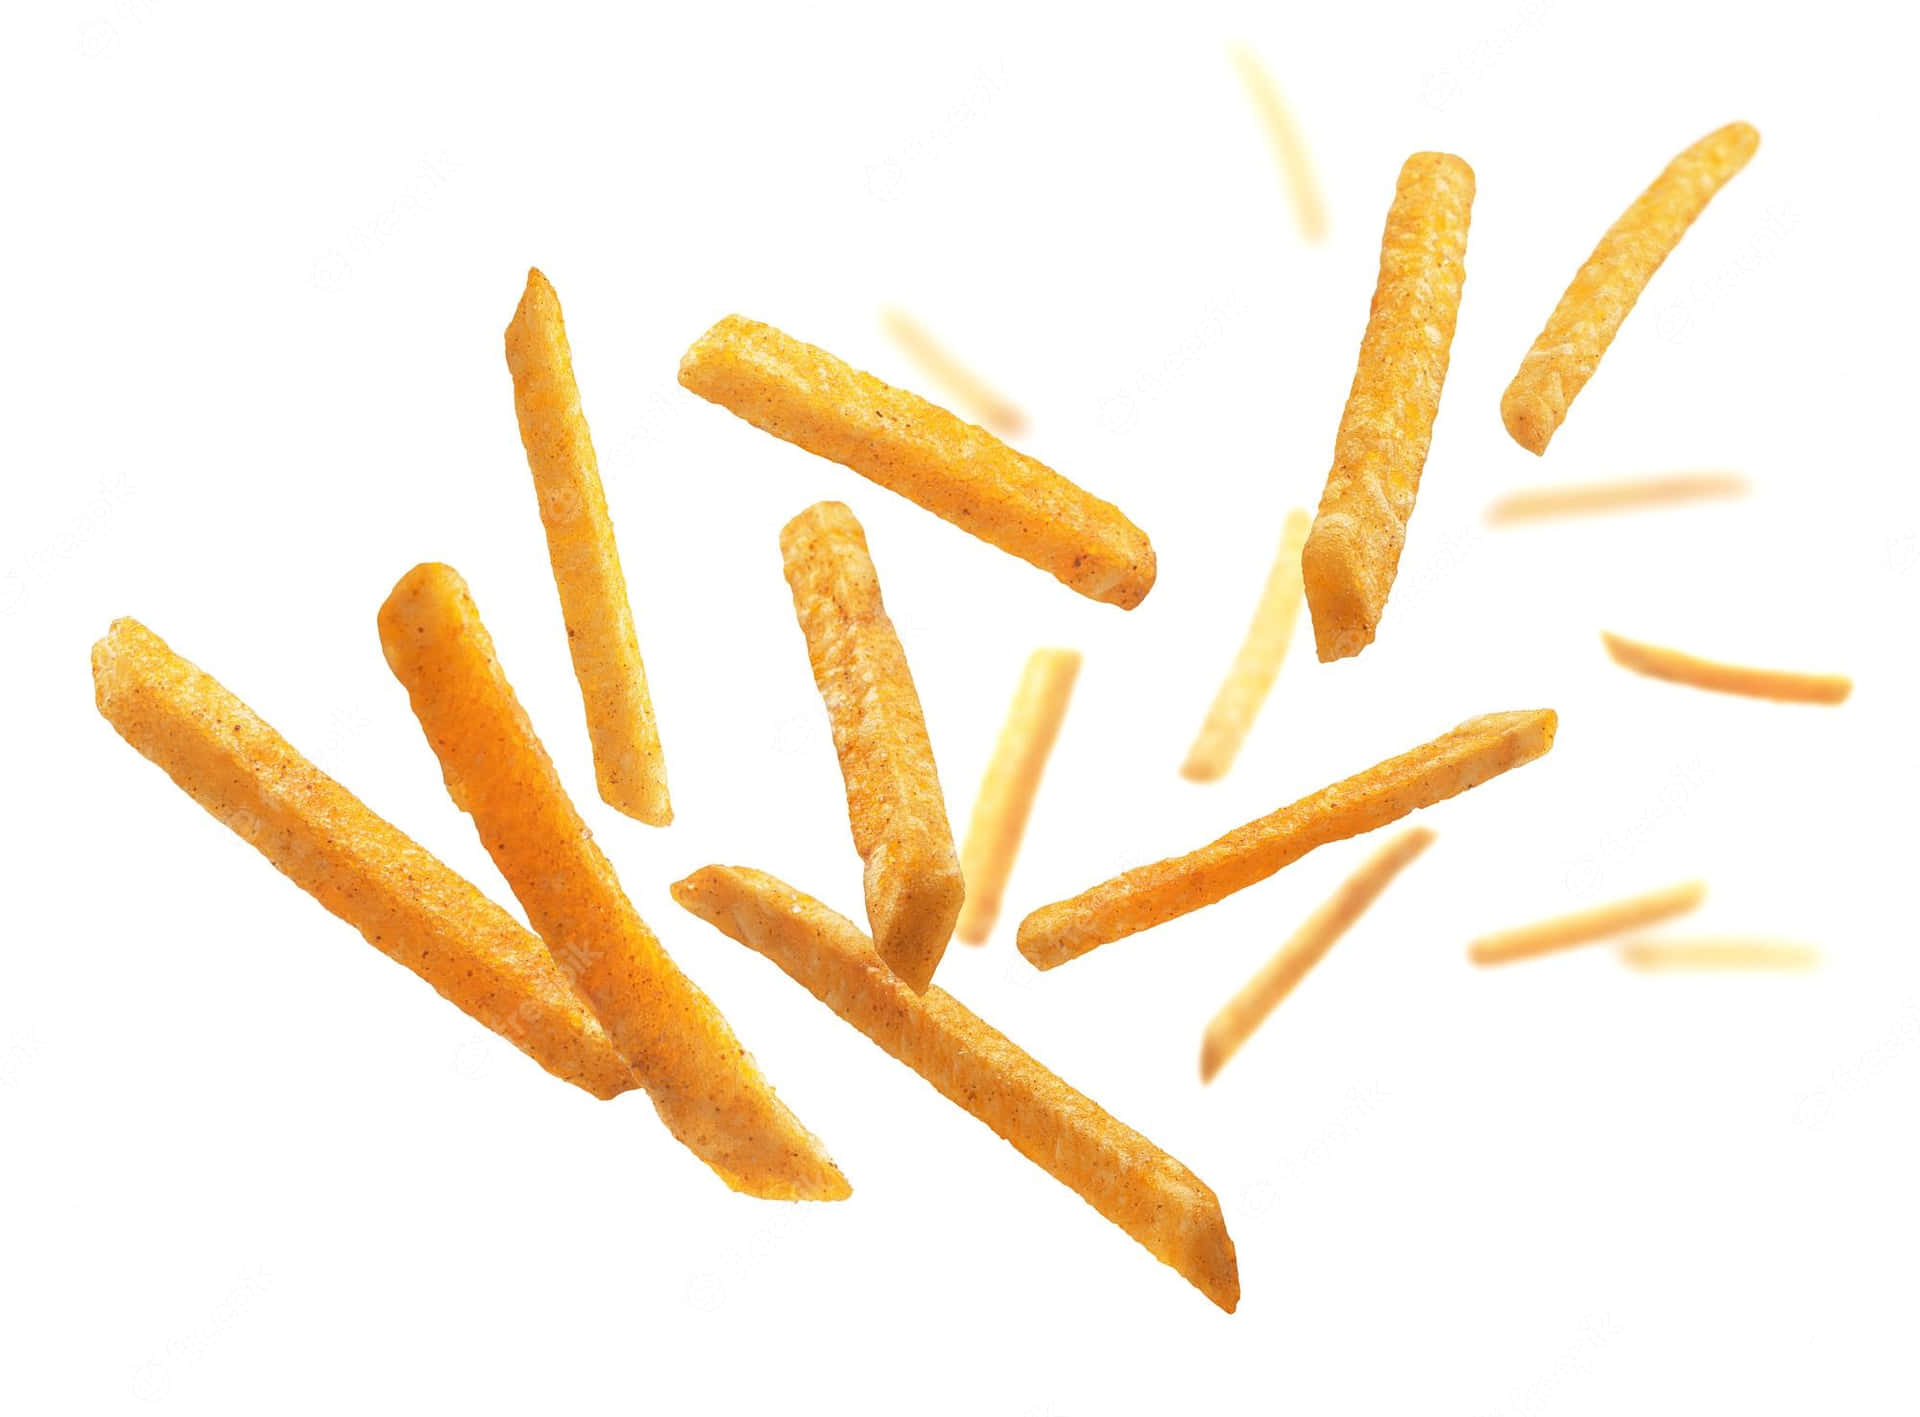 A heaping plate of delicious French Fries.